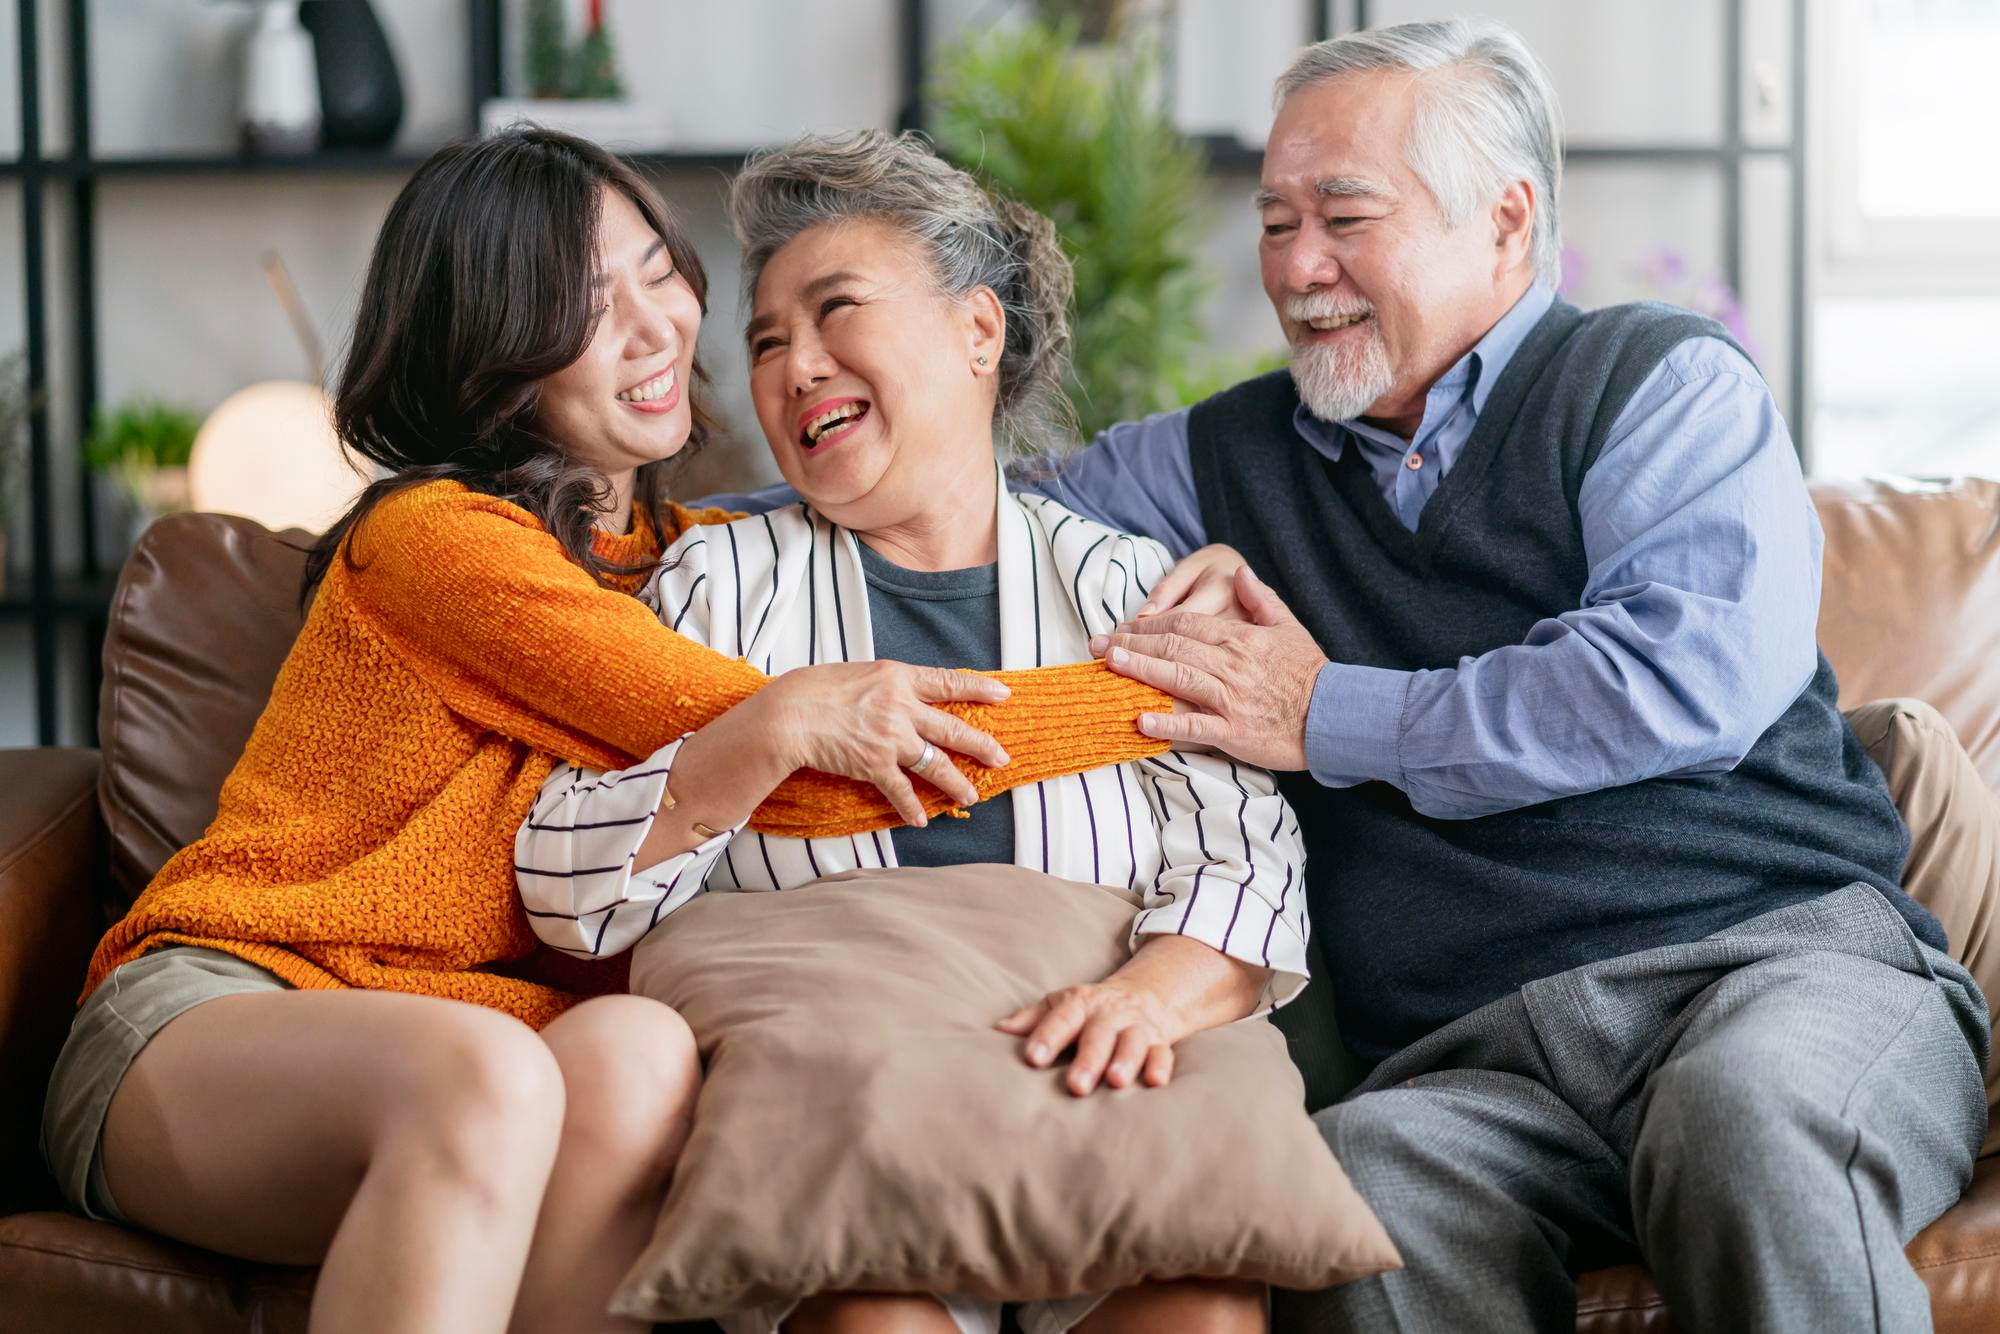 happiness-asian-family-candid-daughter-hug-grandparent-mother-farther-senior-elder-cozy-relax-sofa-couch-surprise-visiting-living-room-hometogether-hug-cheerful-asian-family-home